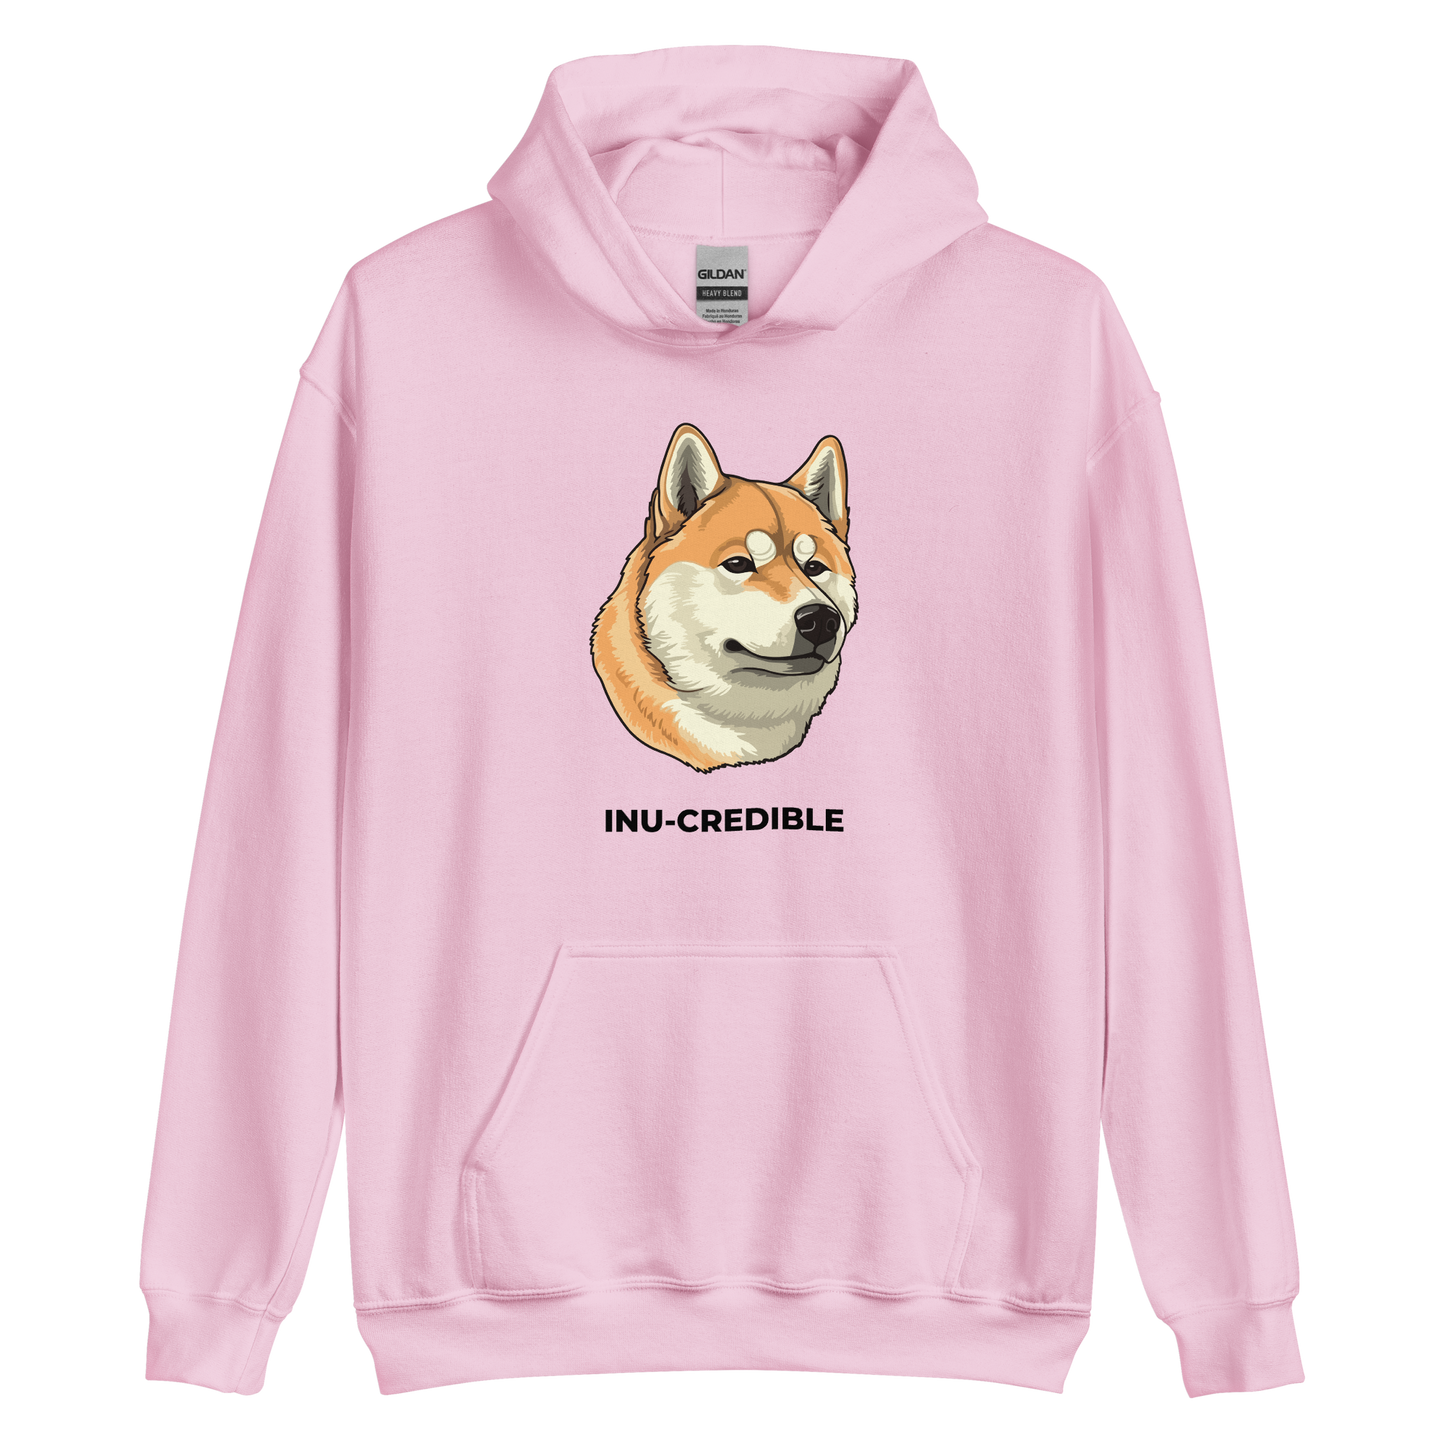 Light Pink Shiba Inu Hoodie featuring the Inu-Credible graphic on the chest - Funny Graphic Shiba Inu Hoodies - Boozy Fox